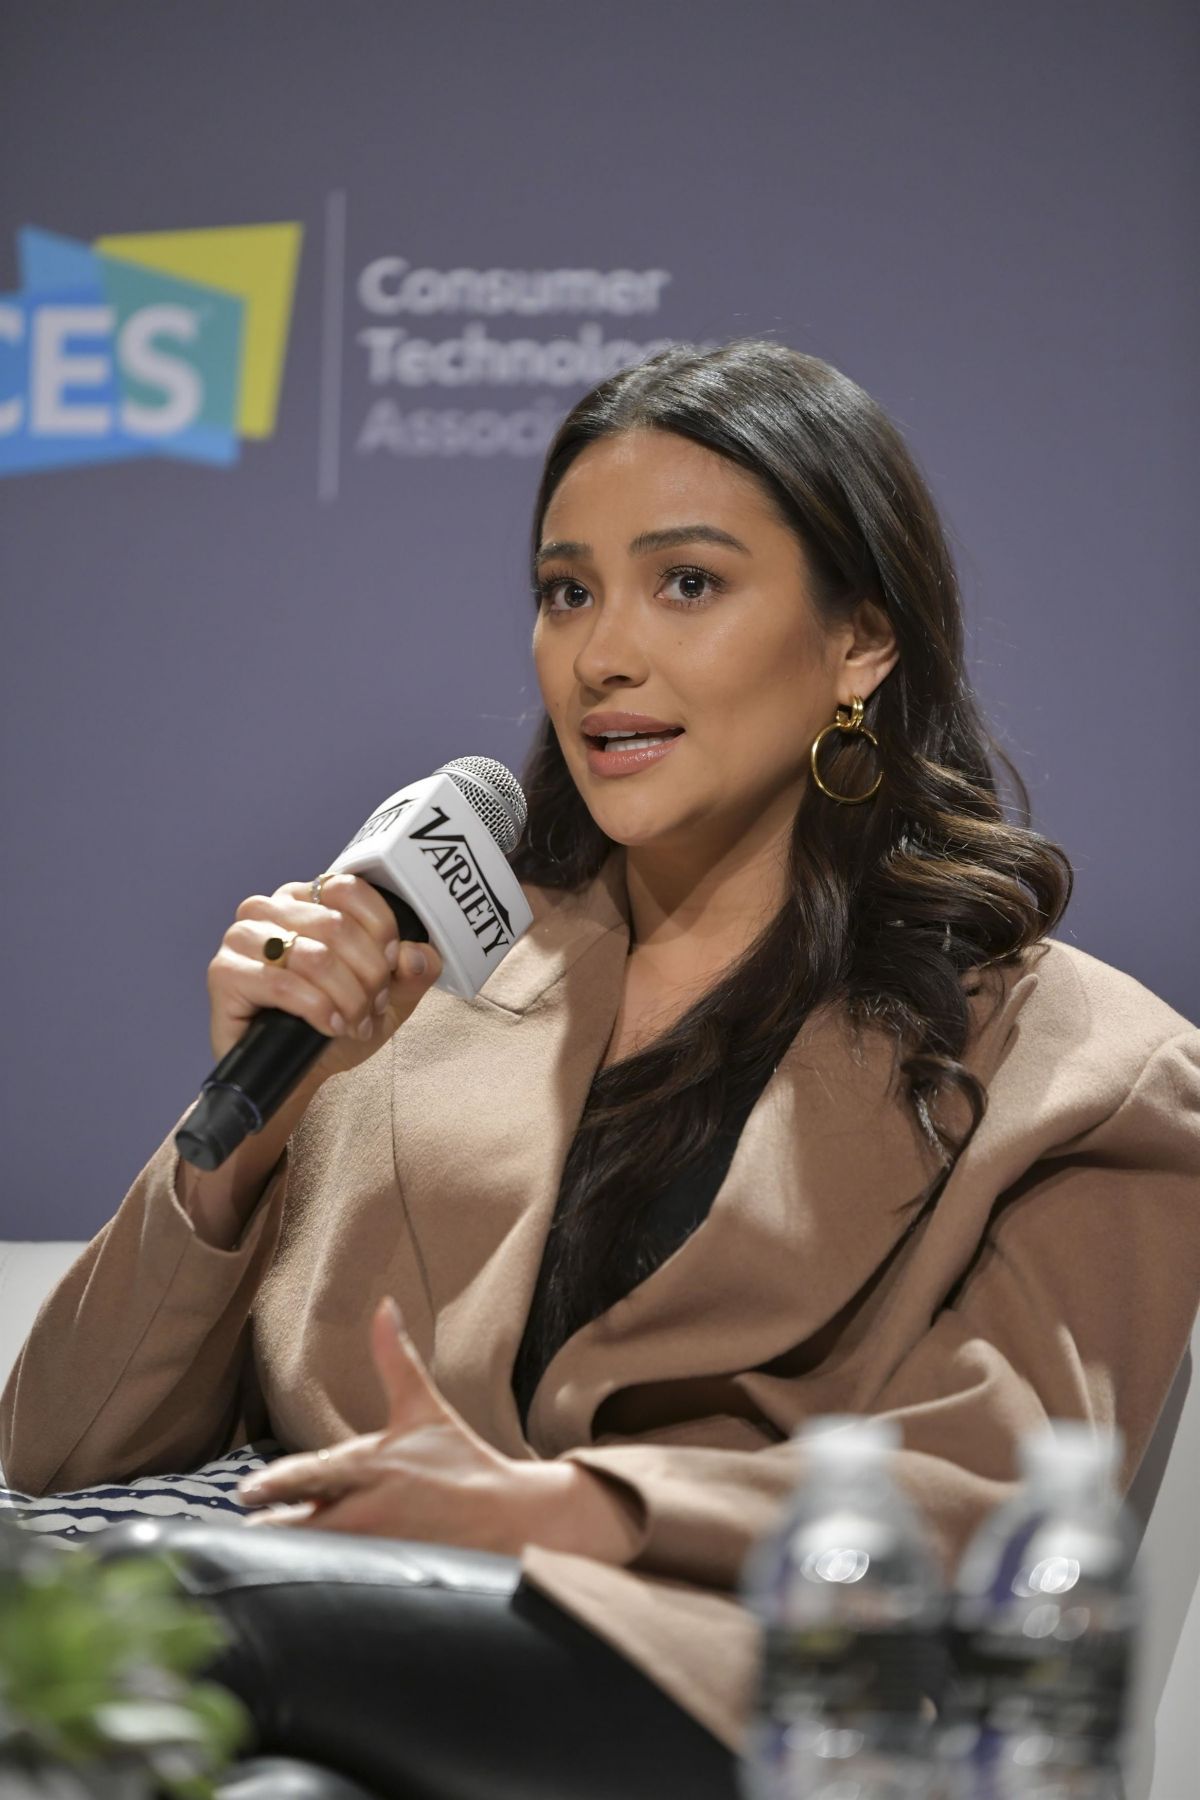 SHAY MITCHELL at CES 2020 in Las Vegas 01/08/2020 – HawtCelebs